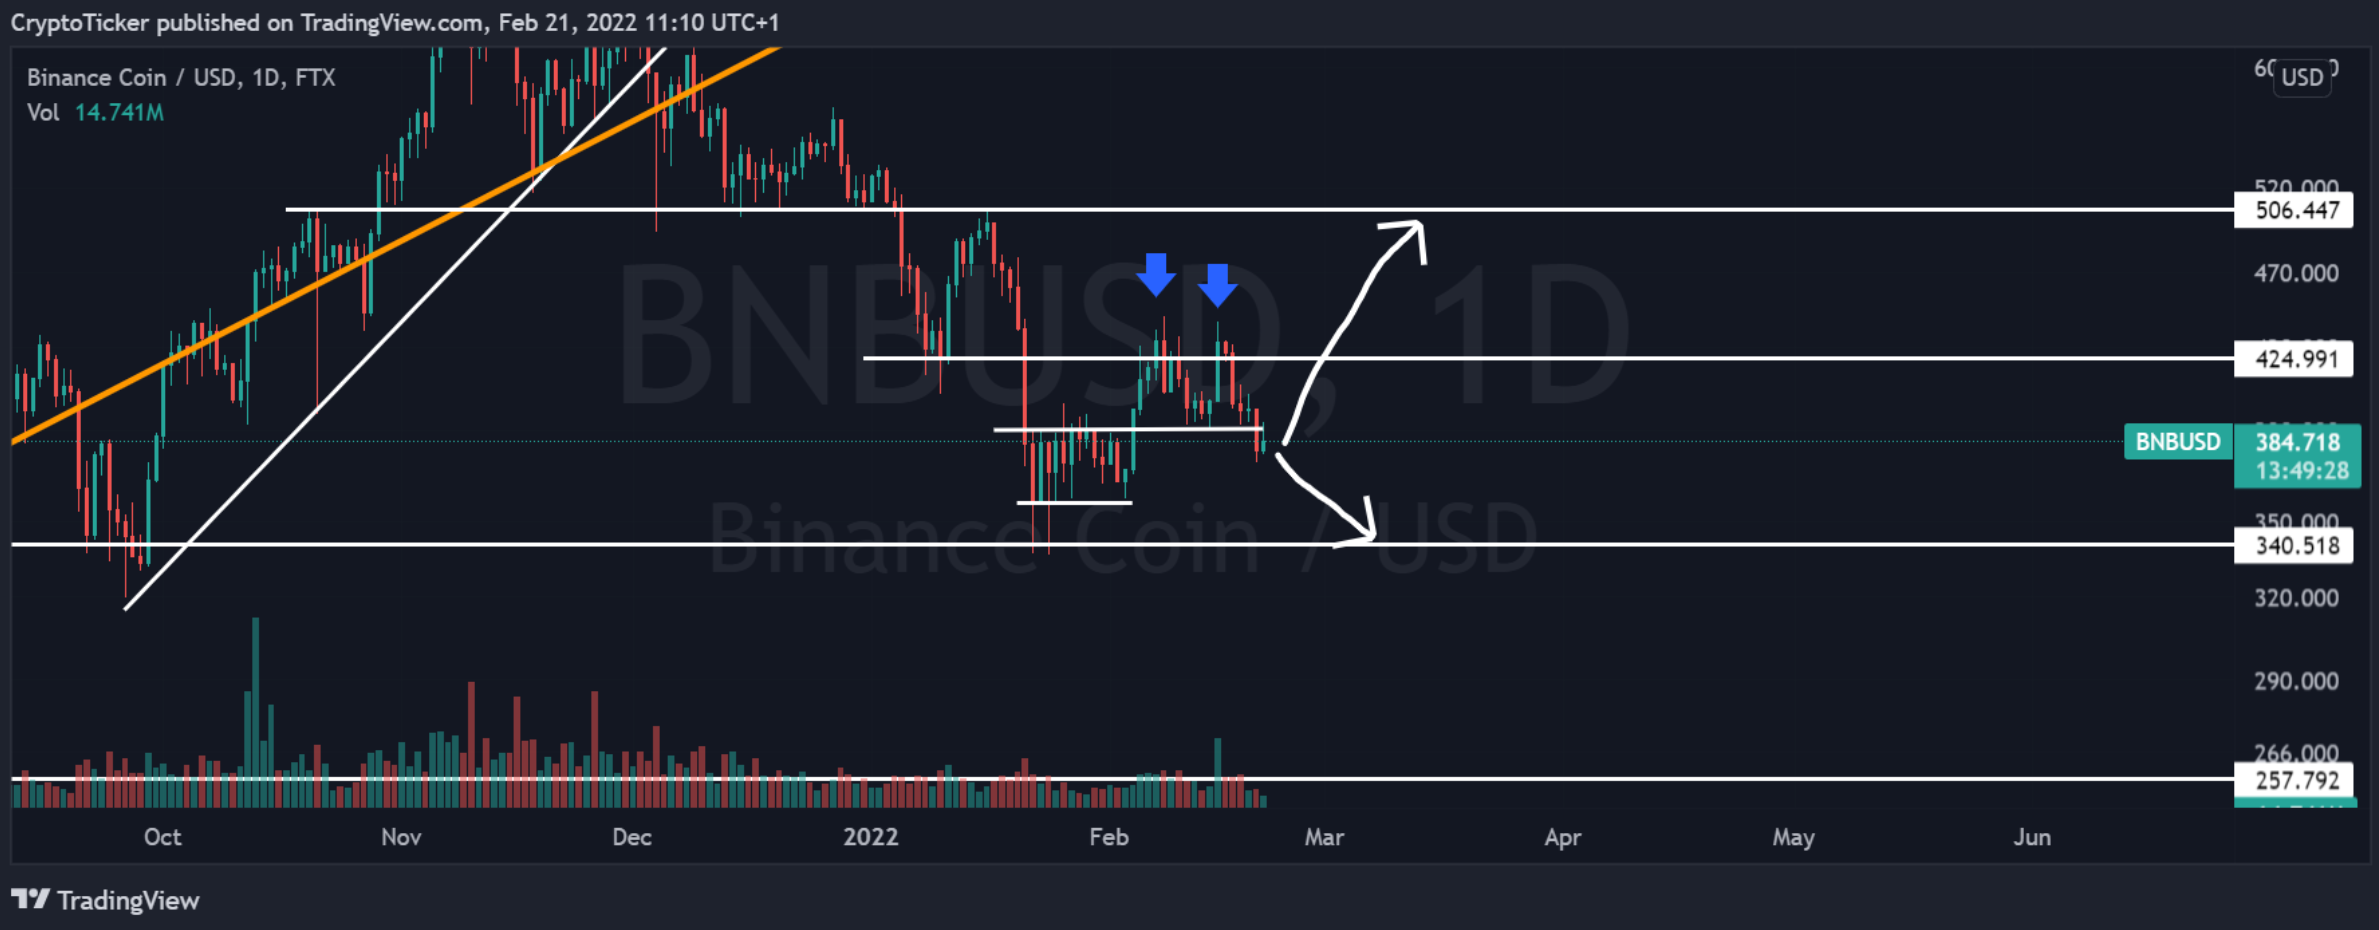 BNB/USD 1-day chart showing the potential scenario of BNB price